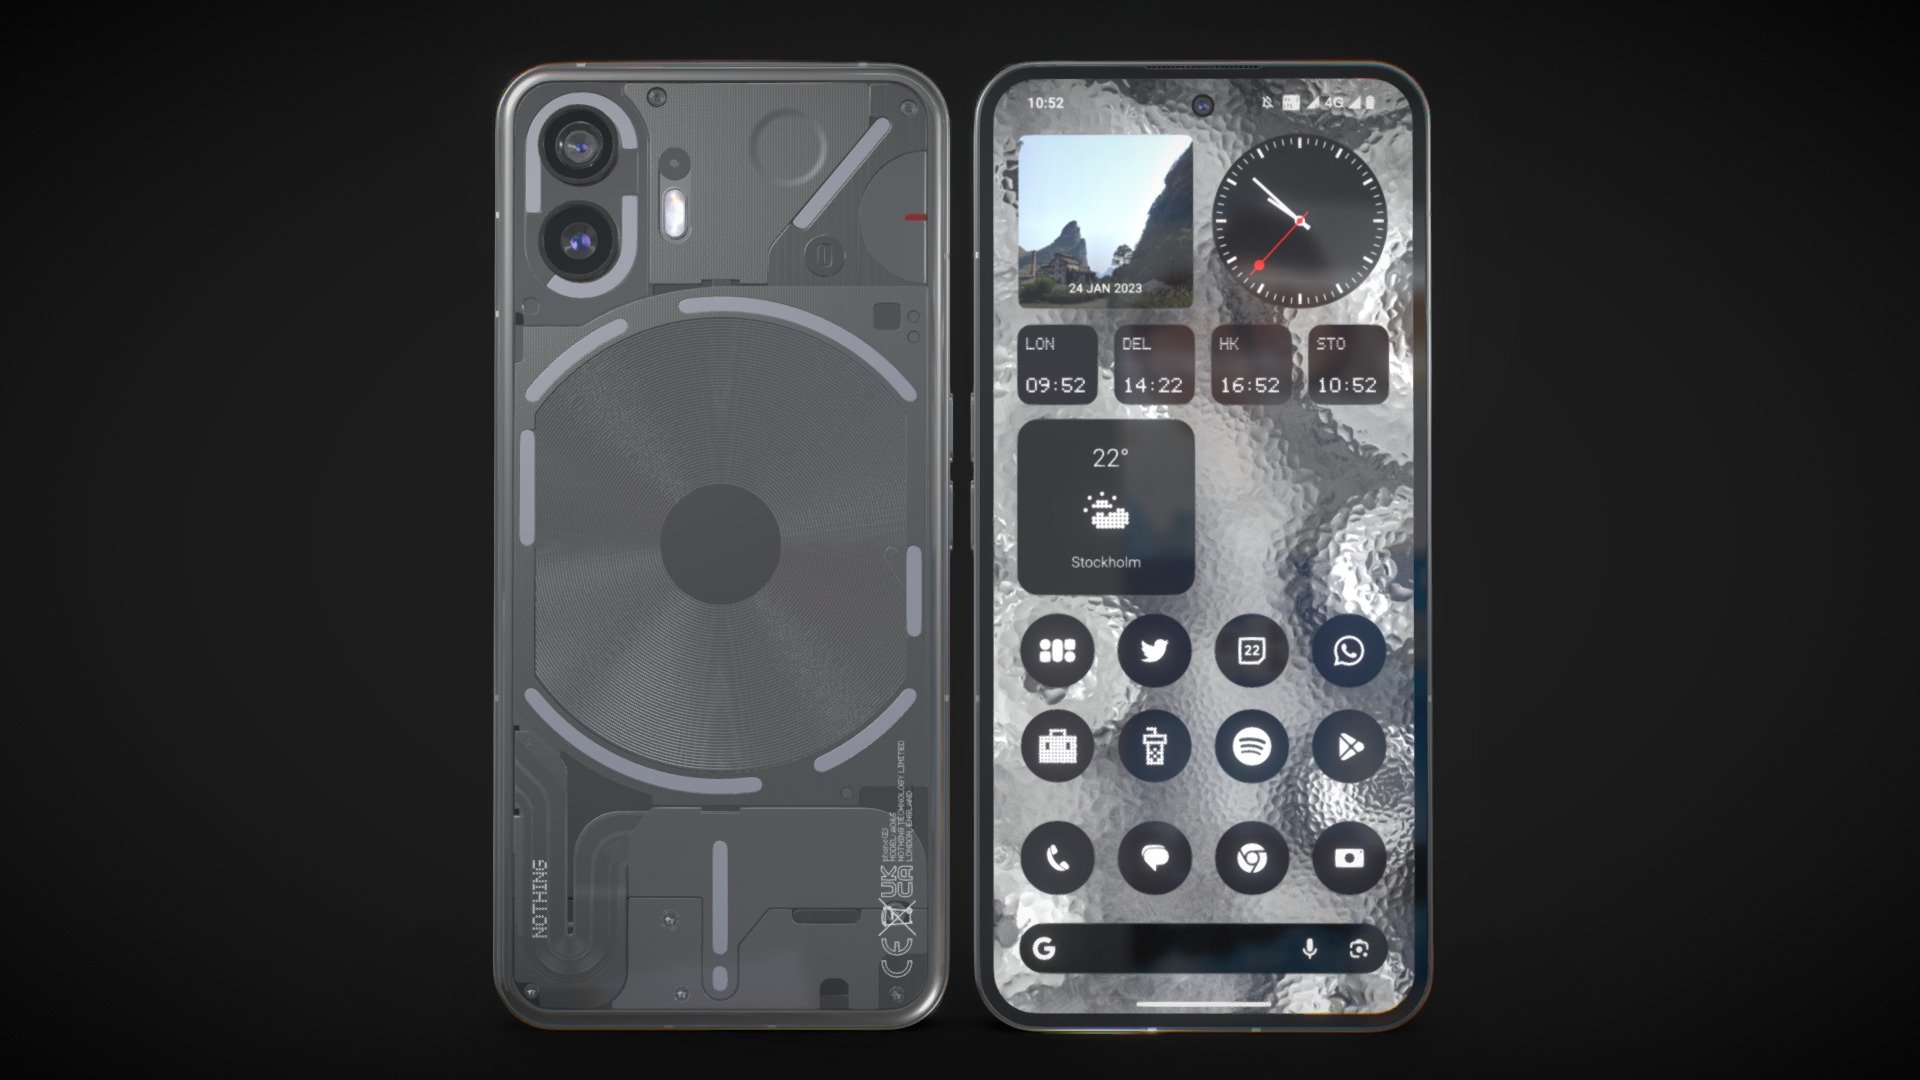 Realistic (copy) 3d model Nothing Phone 2.

This set:




1 file obj standard

1 file 3ds Max 2013 vray material

1 file 3ds Max 2013 corona material

1 file of 3Ds

1 file e3d full set of materials.

1 file cinema 4d standard.

1 file blender cycles.

Topology of geometry:
- forms and proportions of The 3D model
- the geometry of the model was created very neatly
- there are no many-sided polygons
- detailed enough for close-up renders
- the model optimized for turbosmooth modifier
- Not collapsed the turbosmooth modified
- apply the Smooth modifier with a parameter to get the desired level of detail

Organization of scene:
- to all objects and materials
- real world size (system units - mm)
- coordinates of location of the model in space (x0, y0, z0)
- does not contain extraneous or hidden objects (lights, cameras, shapes etc.)

Excellent renders to you! - Nothing Phone 2 - Buy Royalty Free 3D model by madMIX 3d model